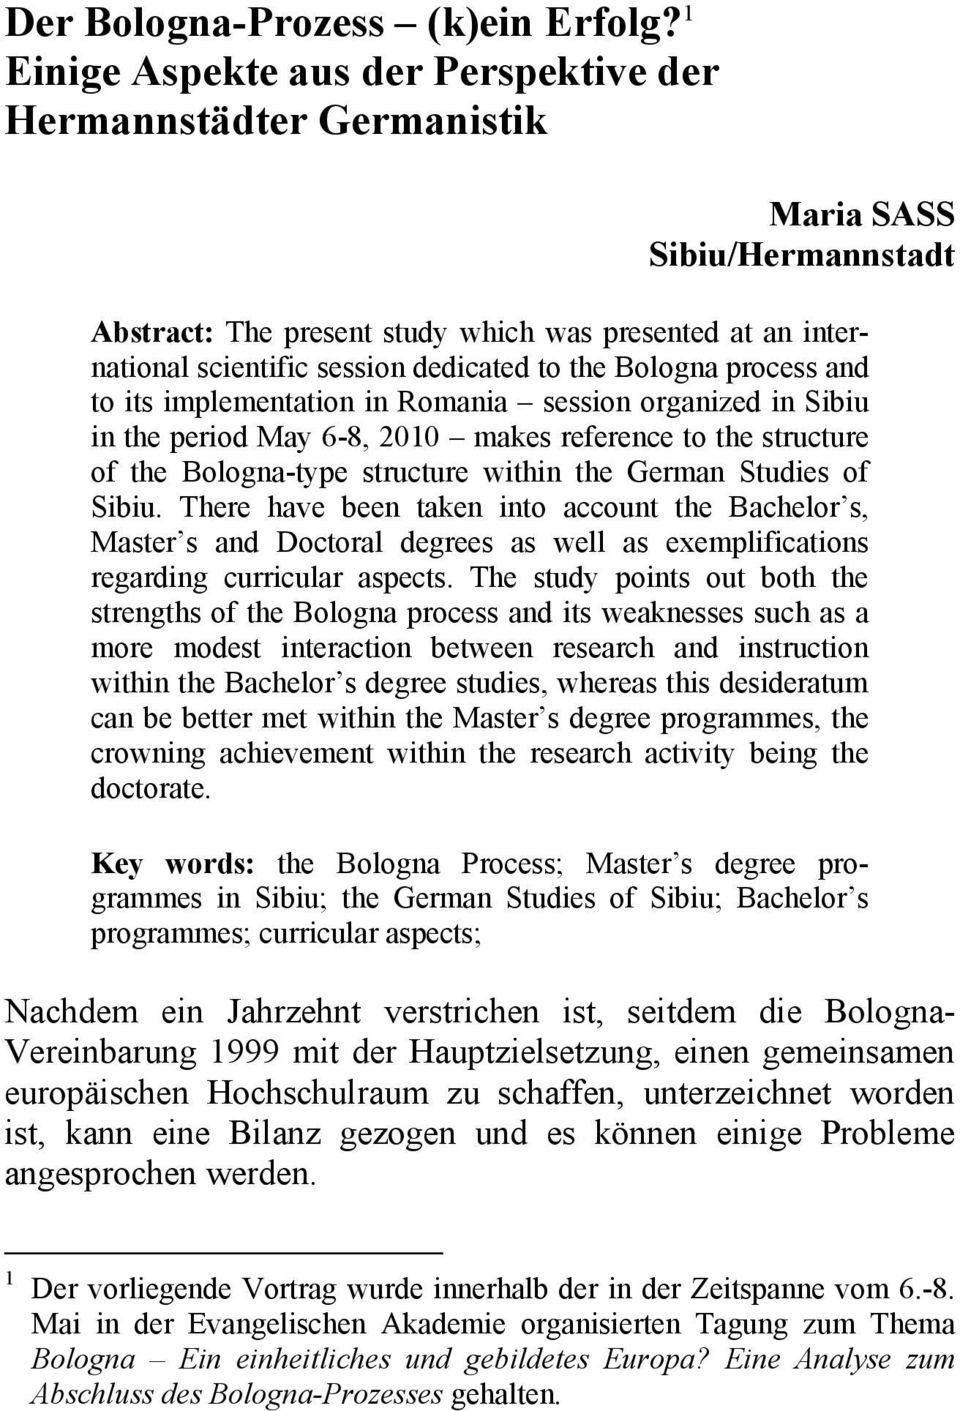 the Bologna process and to its implementation in Romania session organized in Sibiu in the period May 6-8, 2010 makes reference to the structure of the Bologna-type structure within the German